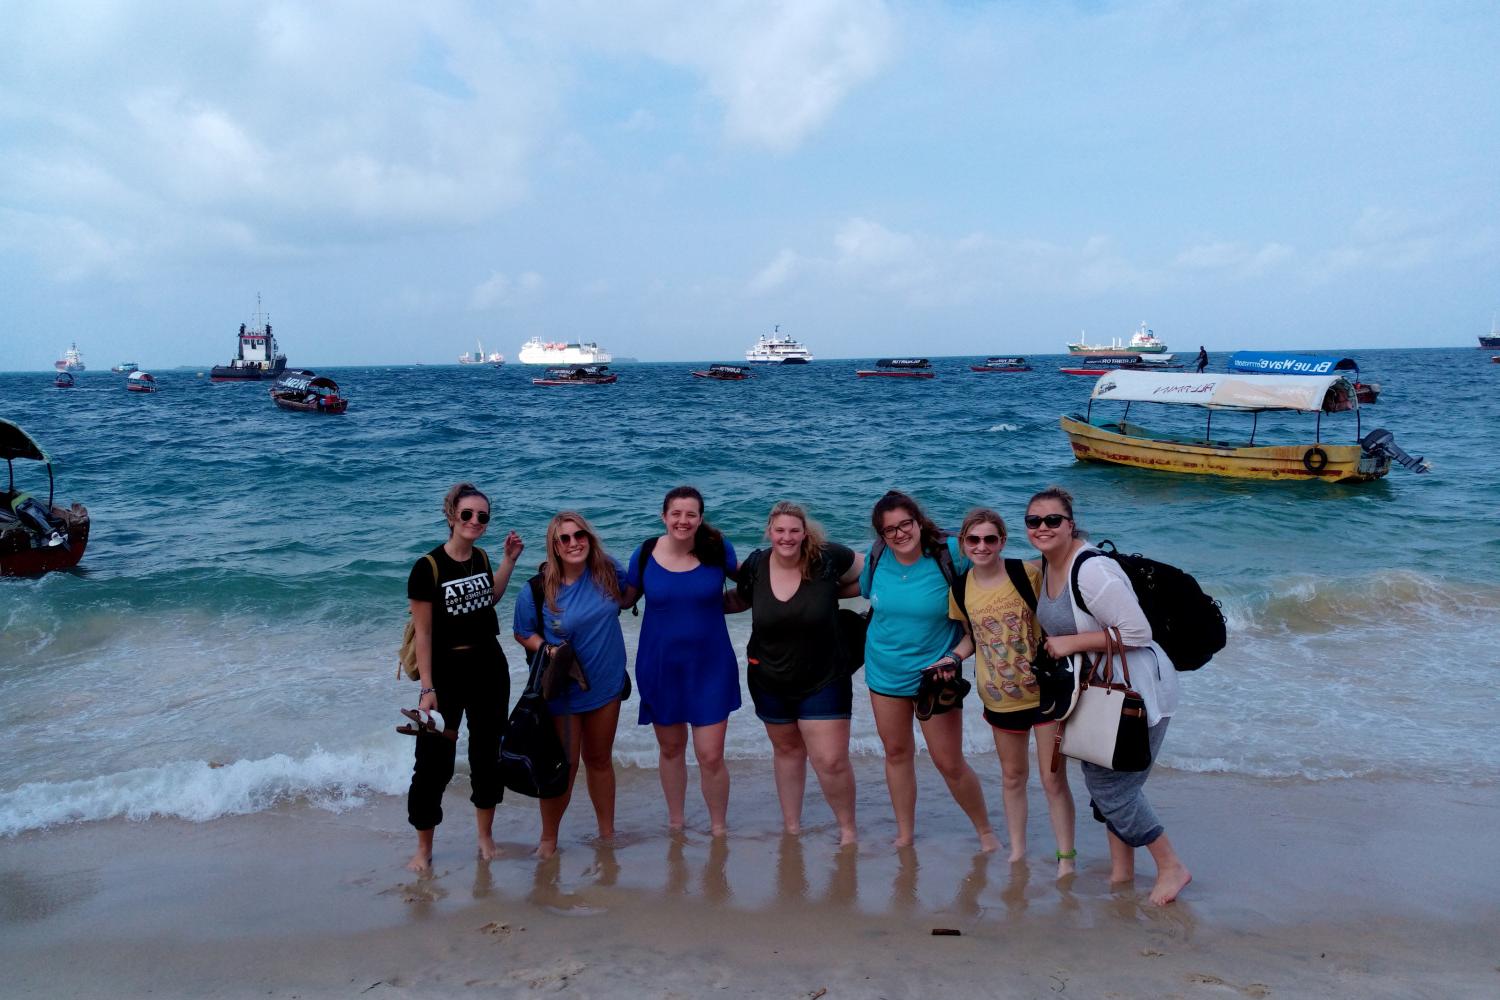 Students pose for a photo seaside on a j项 study tour in 坦桑尼亚.